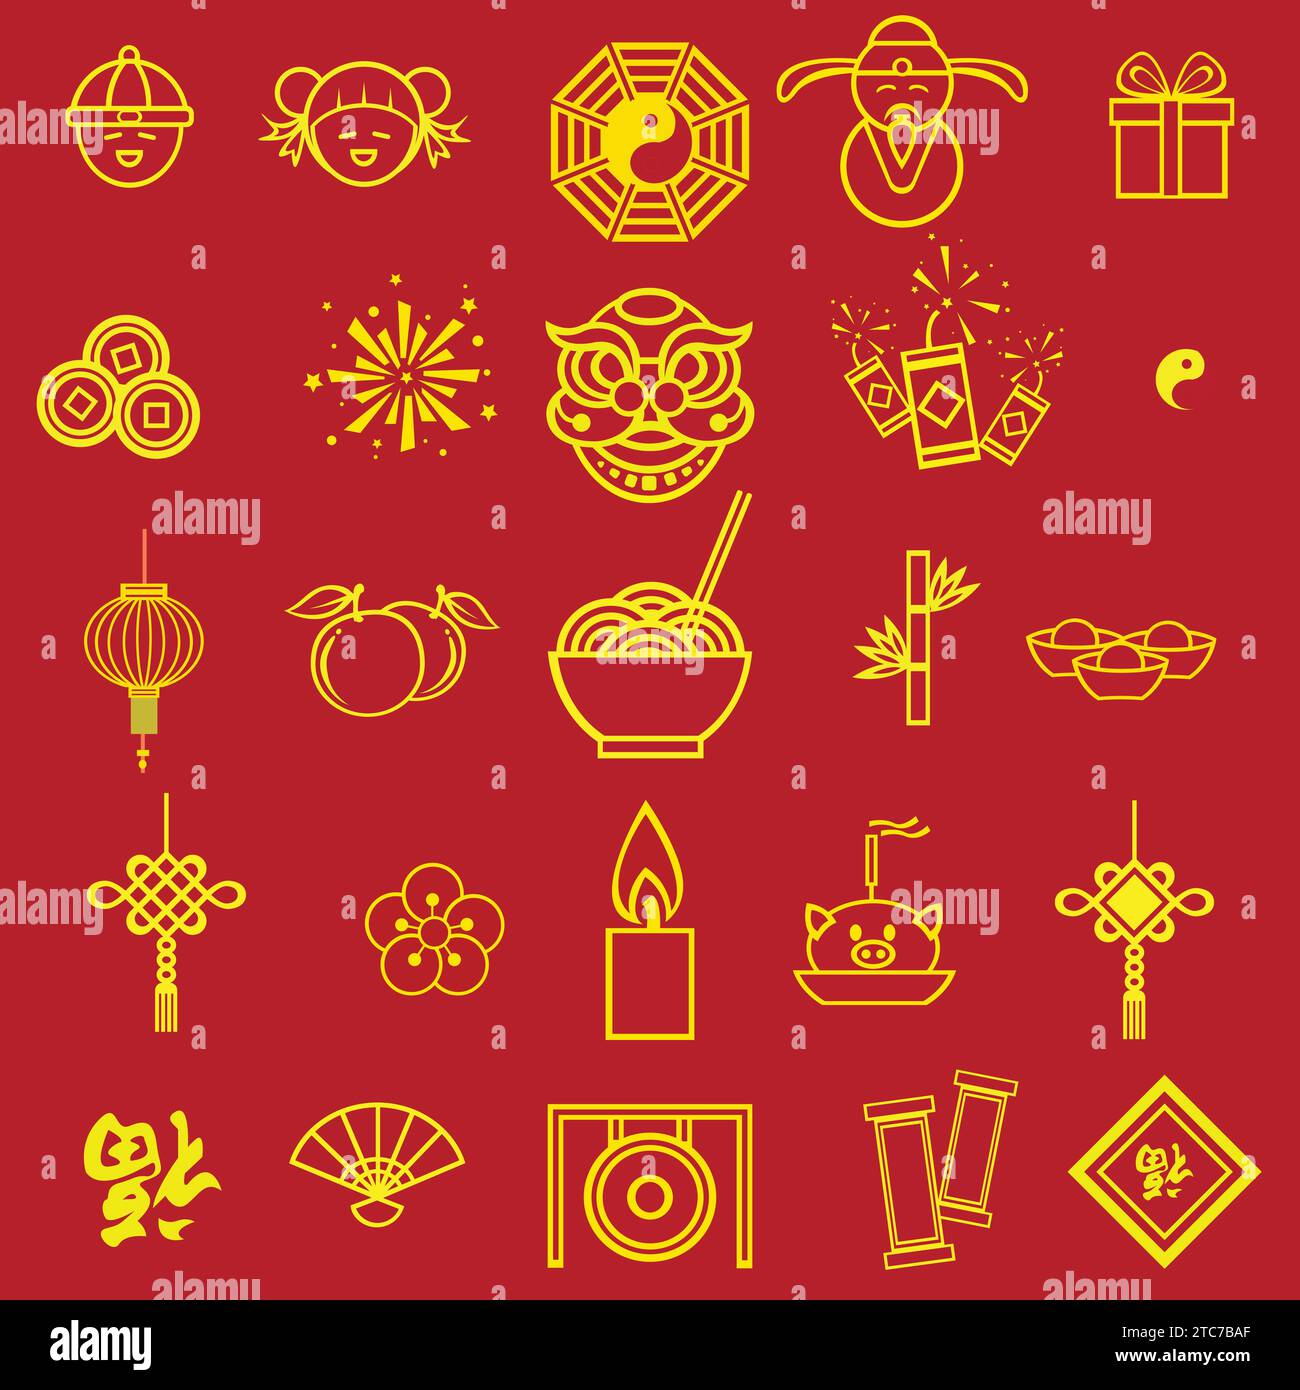 Chinese traditional ornaments, Set of Lunar year decorations, flowers, lanterns, clouds, elements and icons. Chinese new year icon sign symbol set Stock Vector